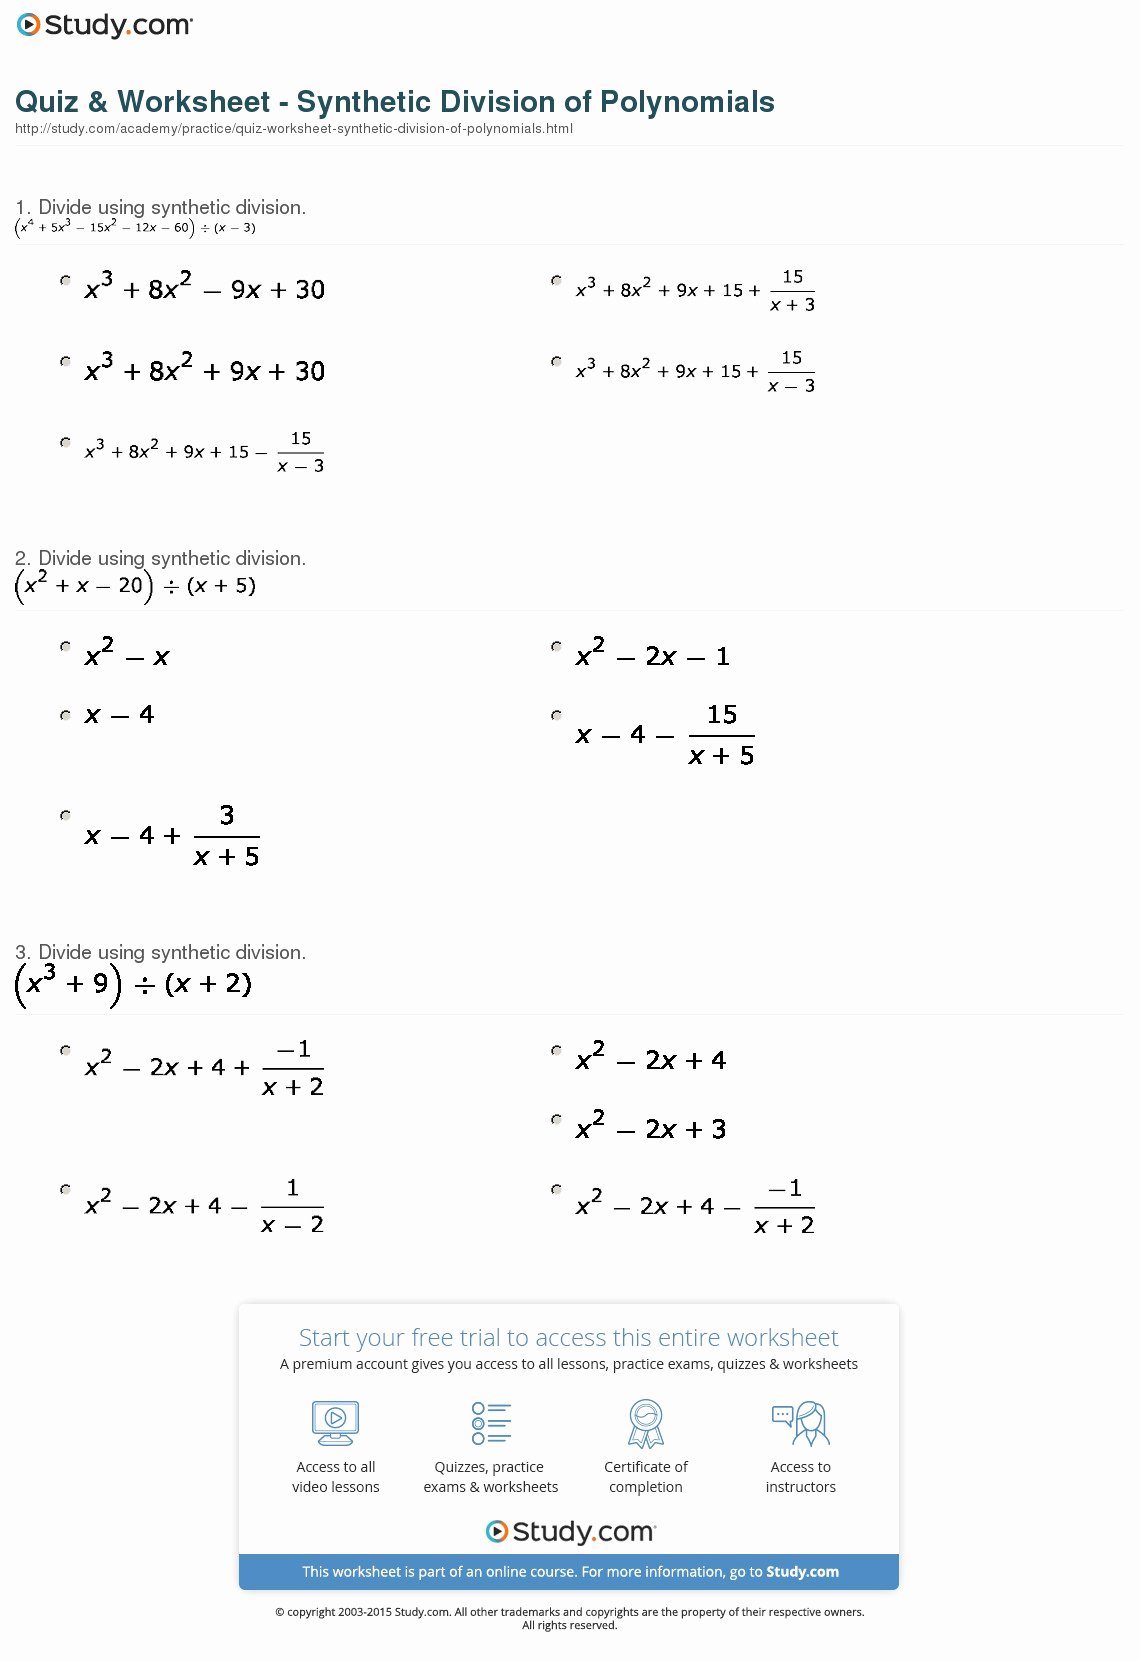 Dividing Polynomials Worksheet Answers Luxury Quiz &amp; Worksheet Synthetic Division Of Polynomials